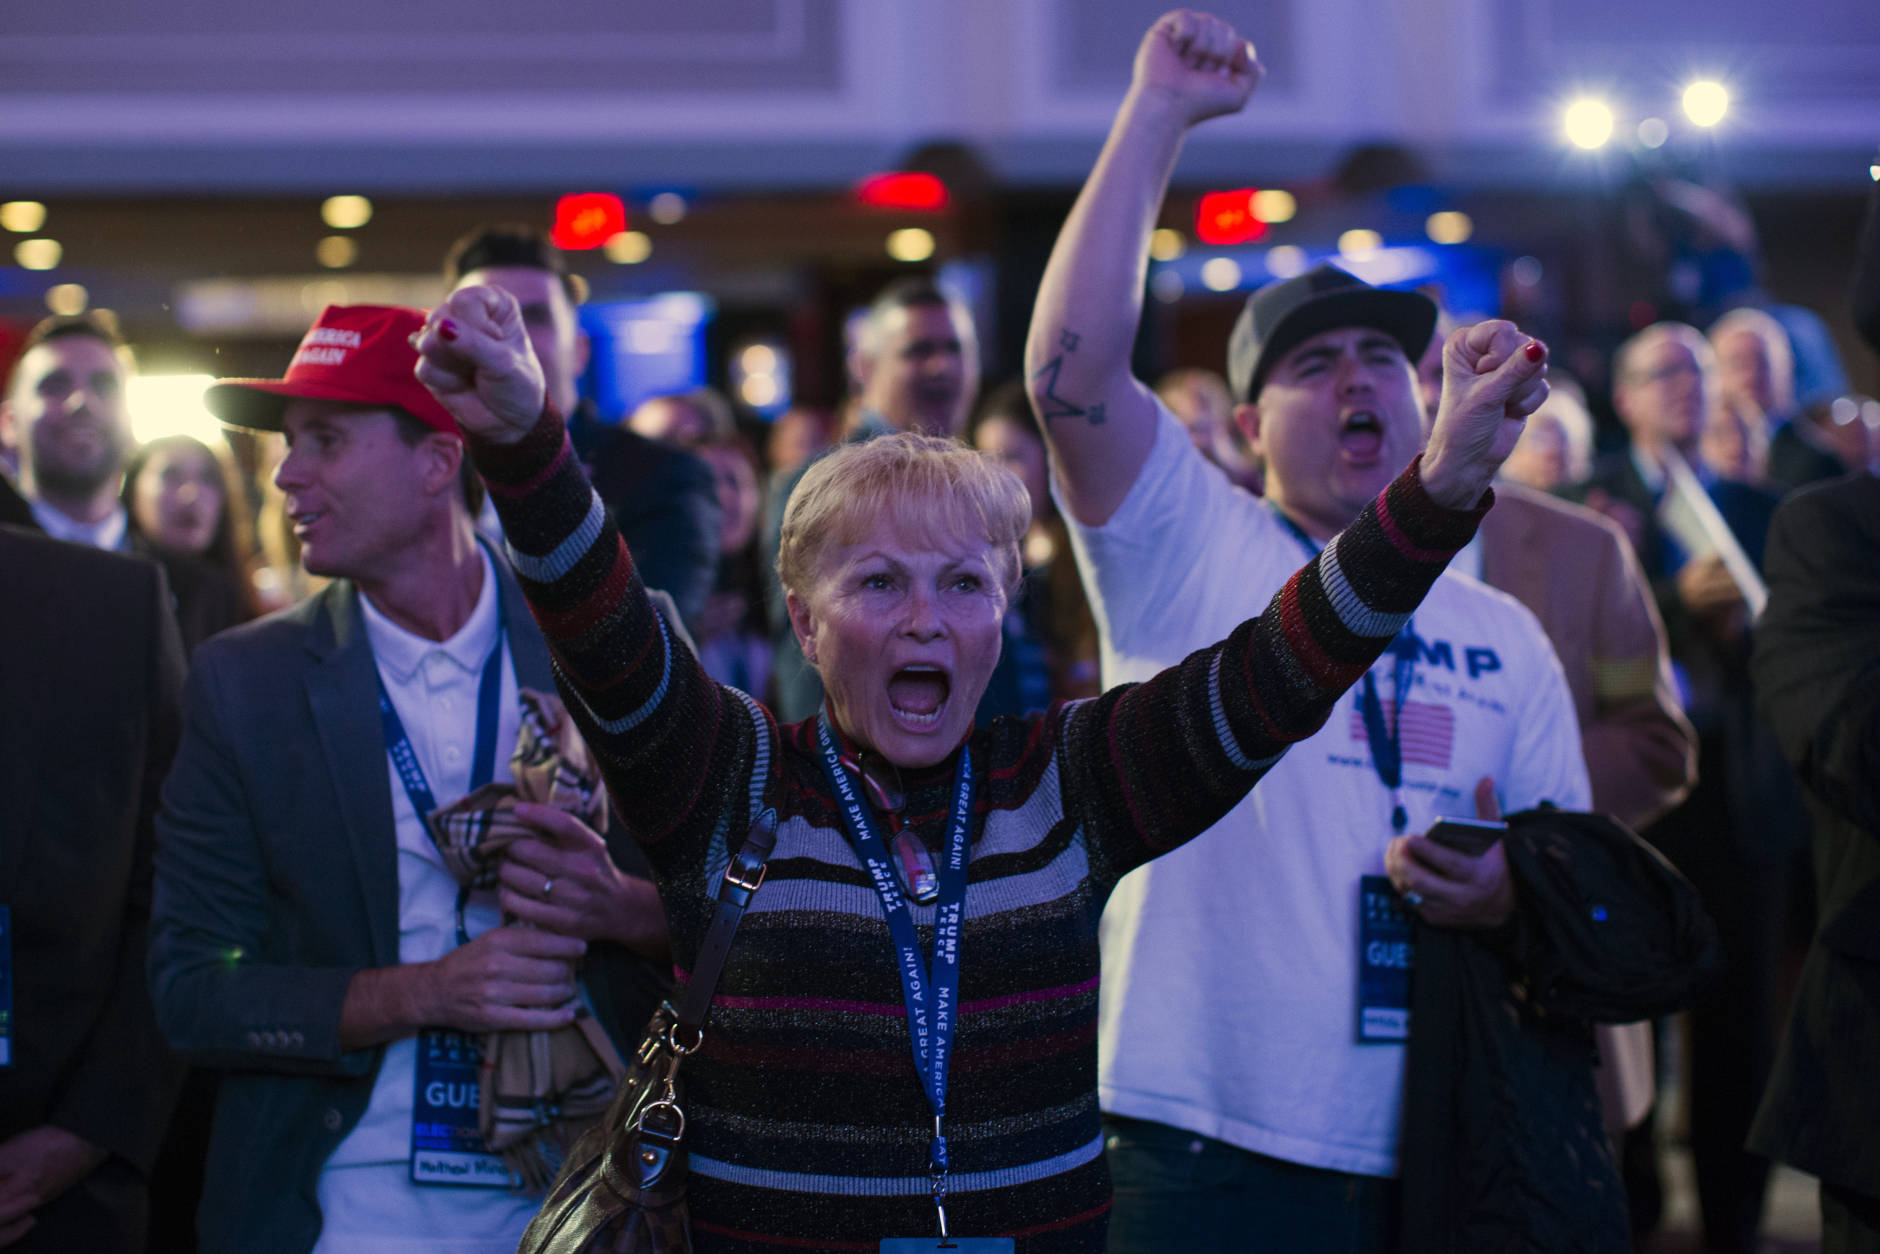 Supporters of Republican presidential candidate Donald Trump cheer during an election night rally, Tuesday, Nov. 8, 2016, in New York. (AP Photo/ Evan Vucci)